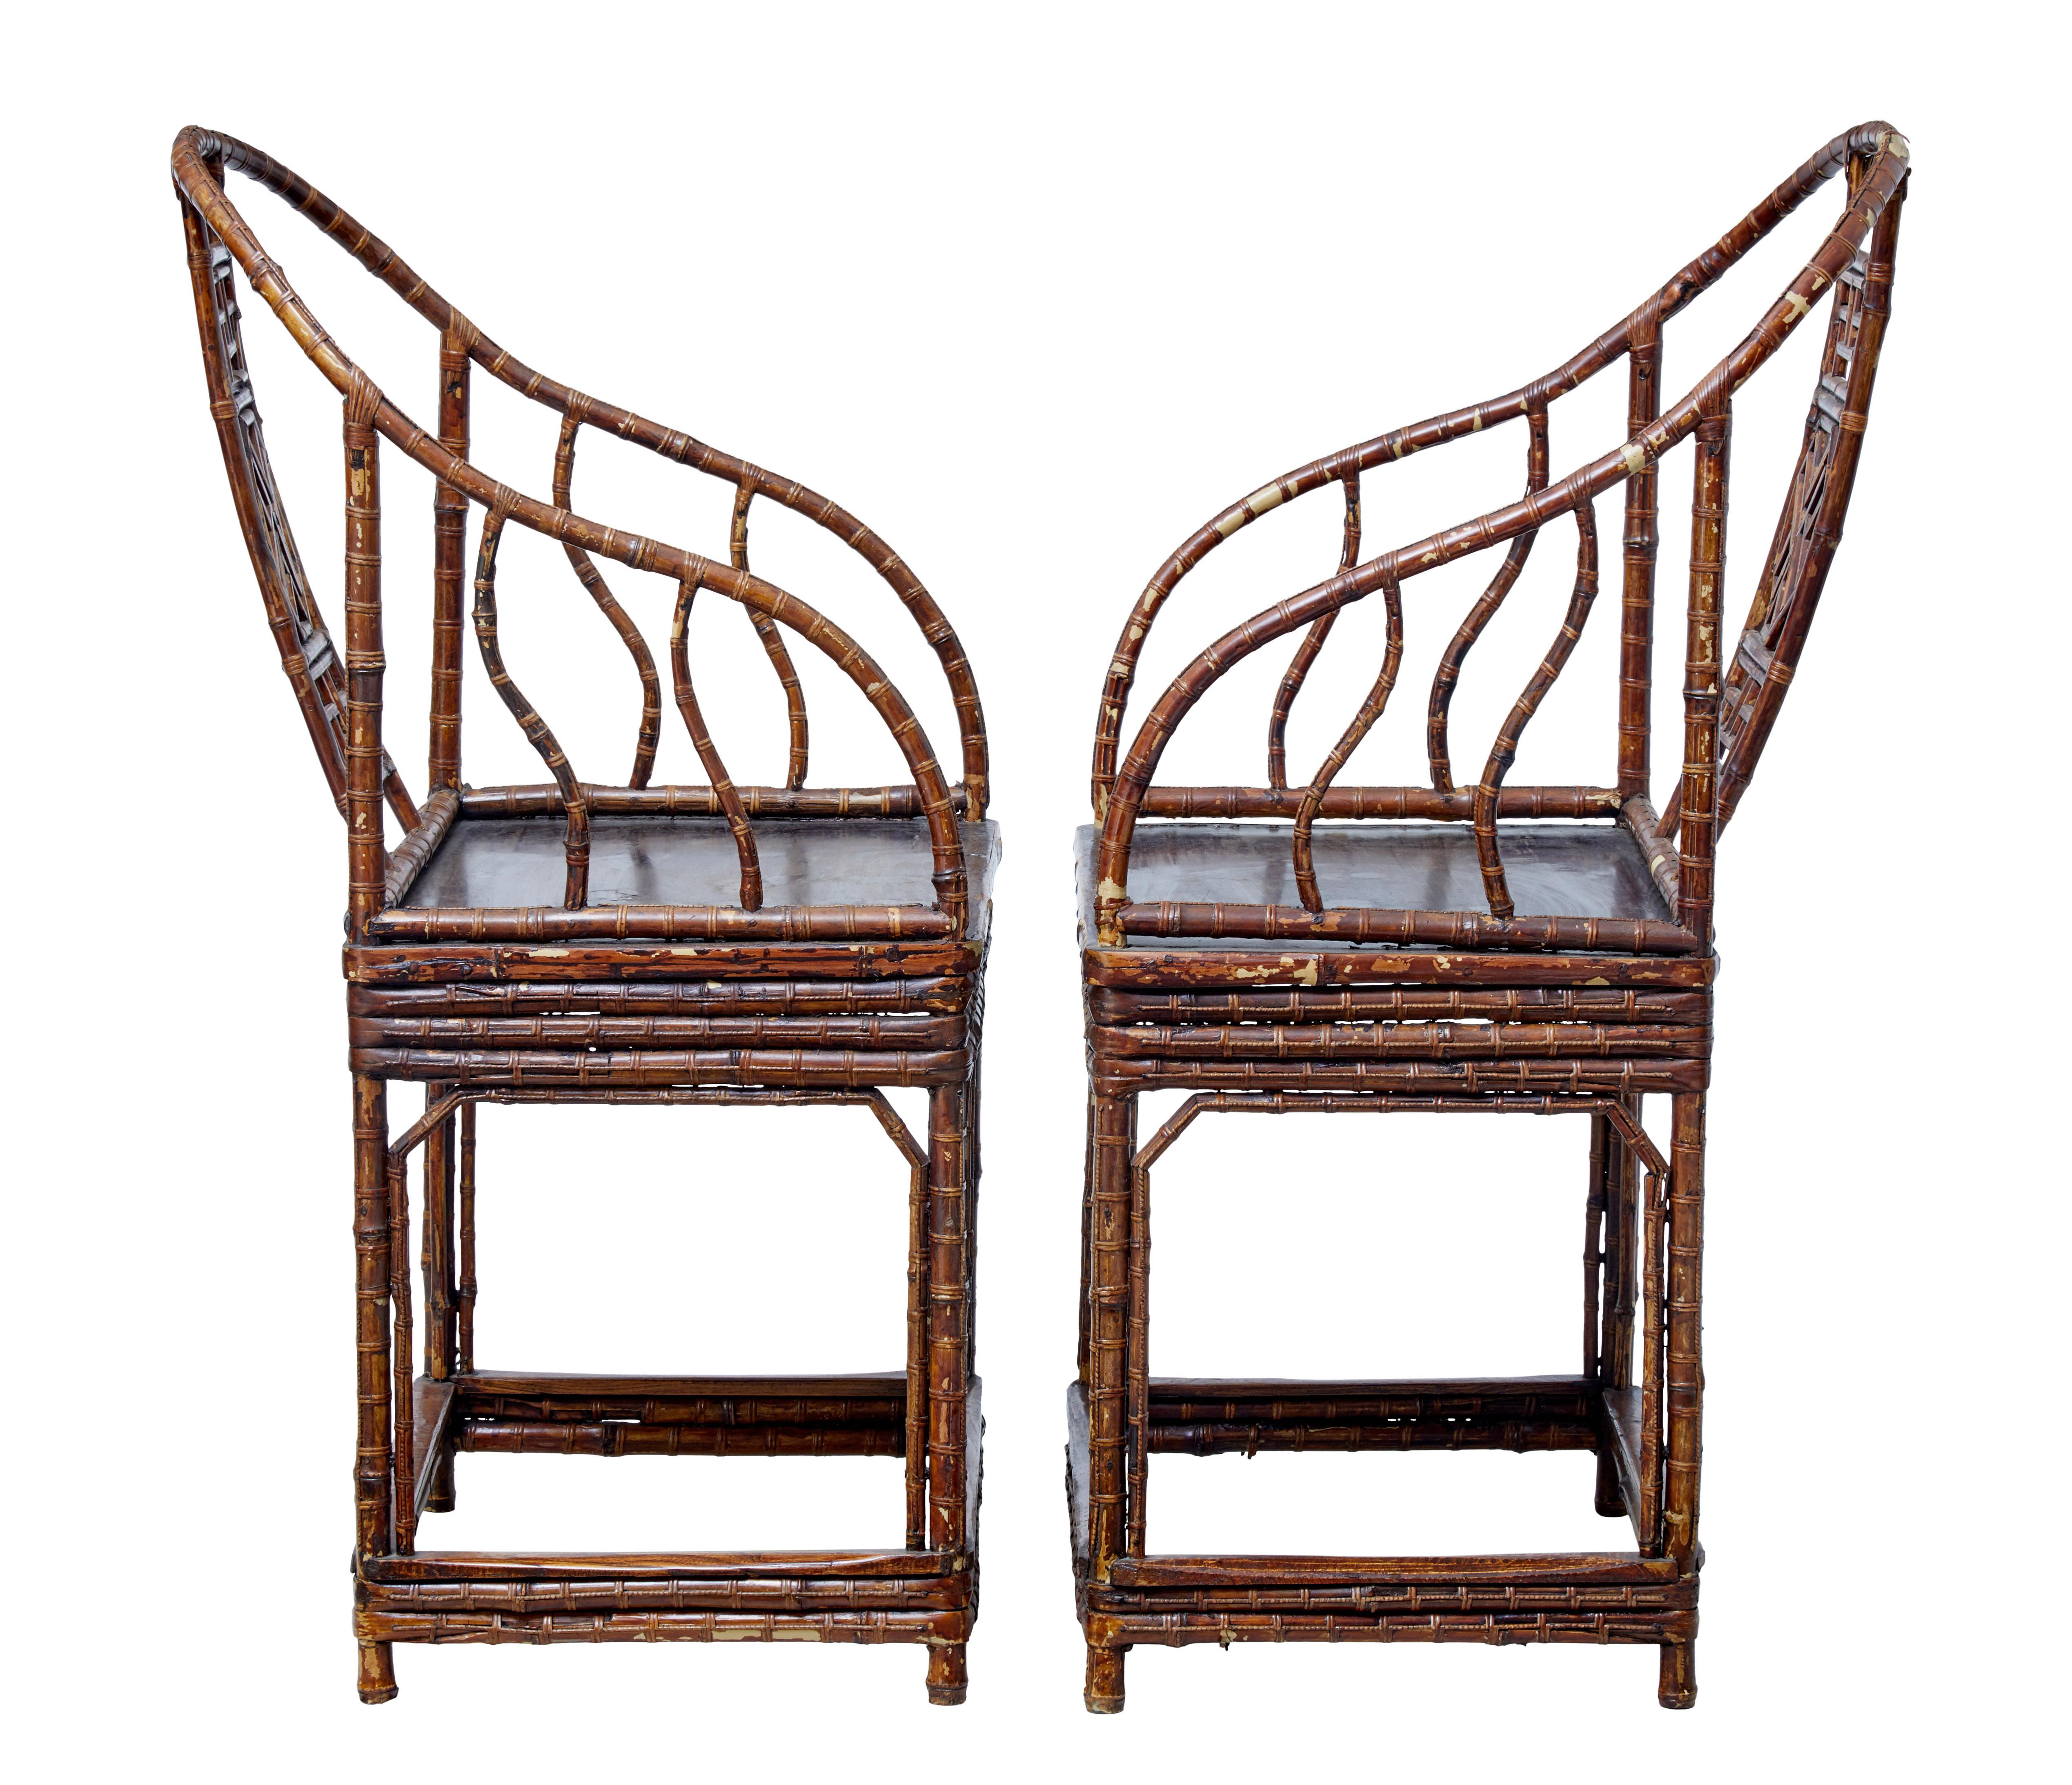 Chinese Export Pair of 19th Century Bamboo Cane Work Chinese Chairs